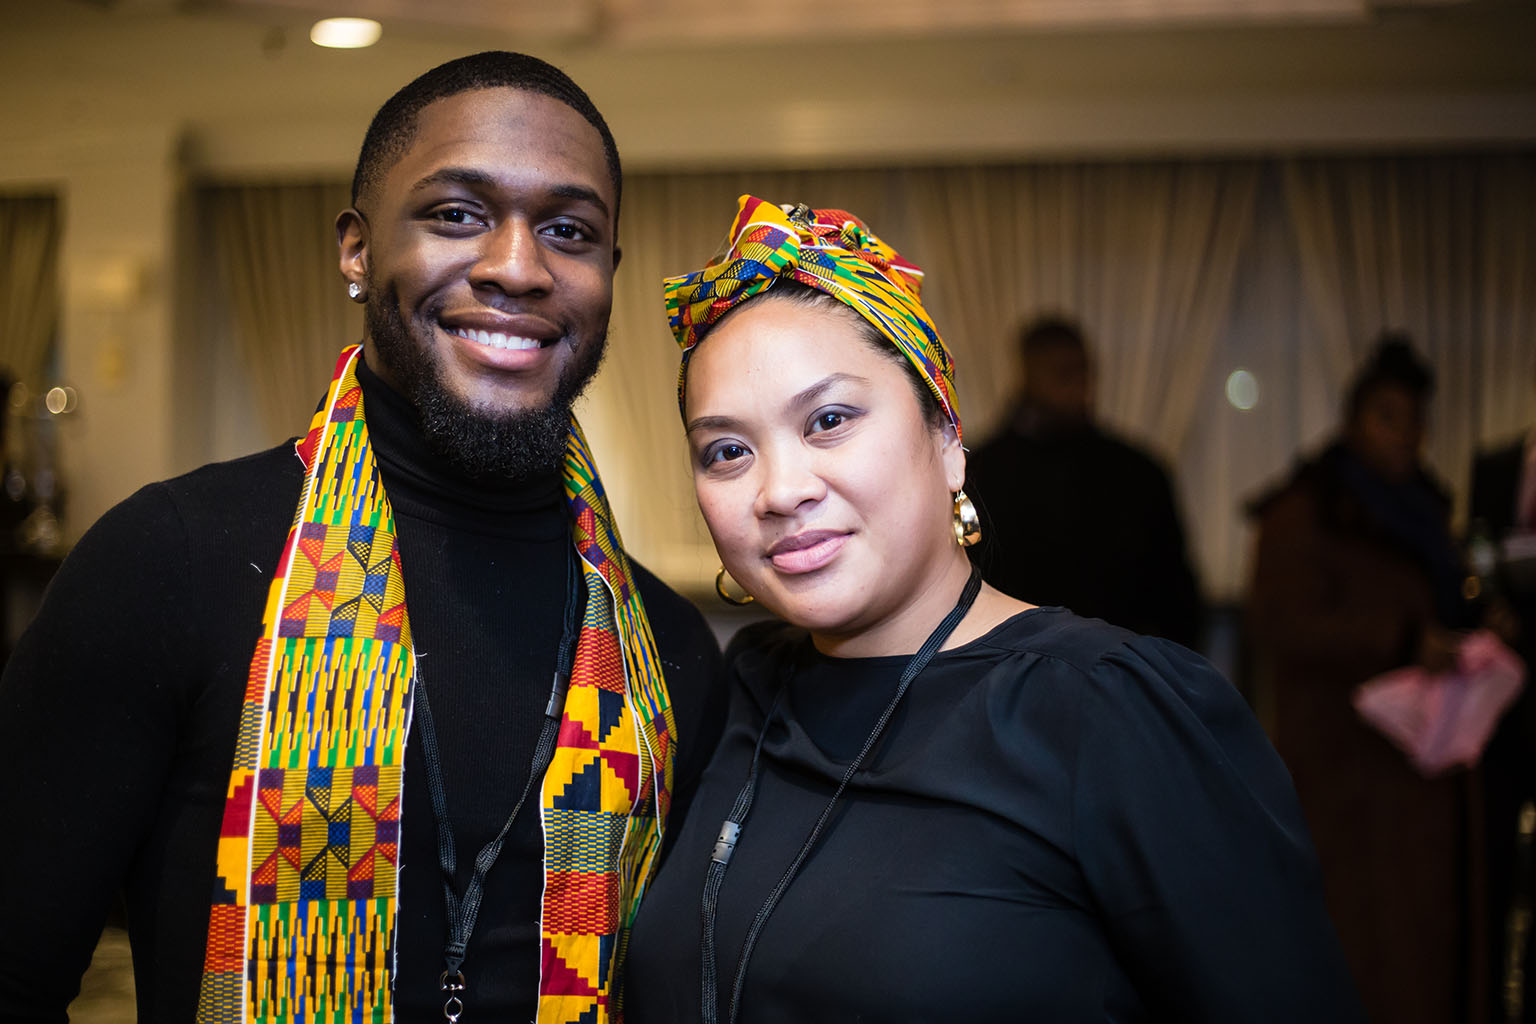 A Man and a Woman in a Colorful Scarf